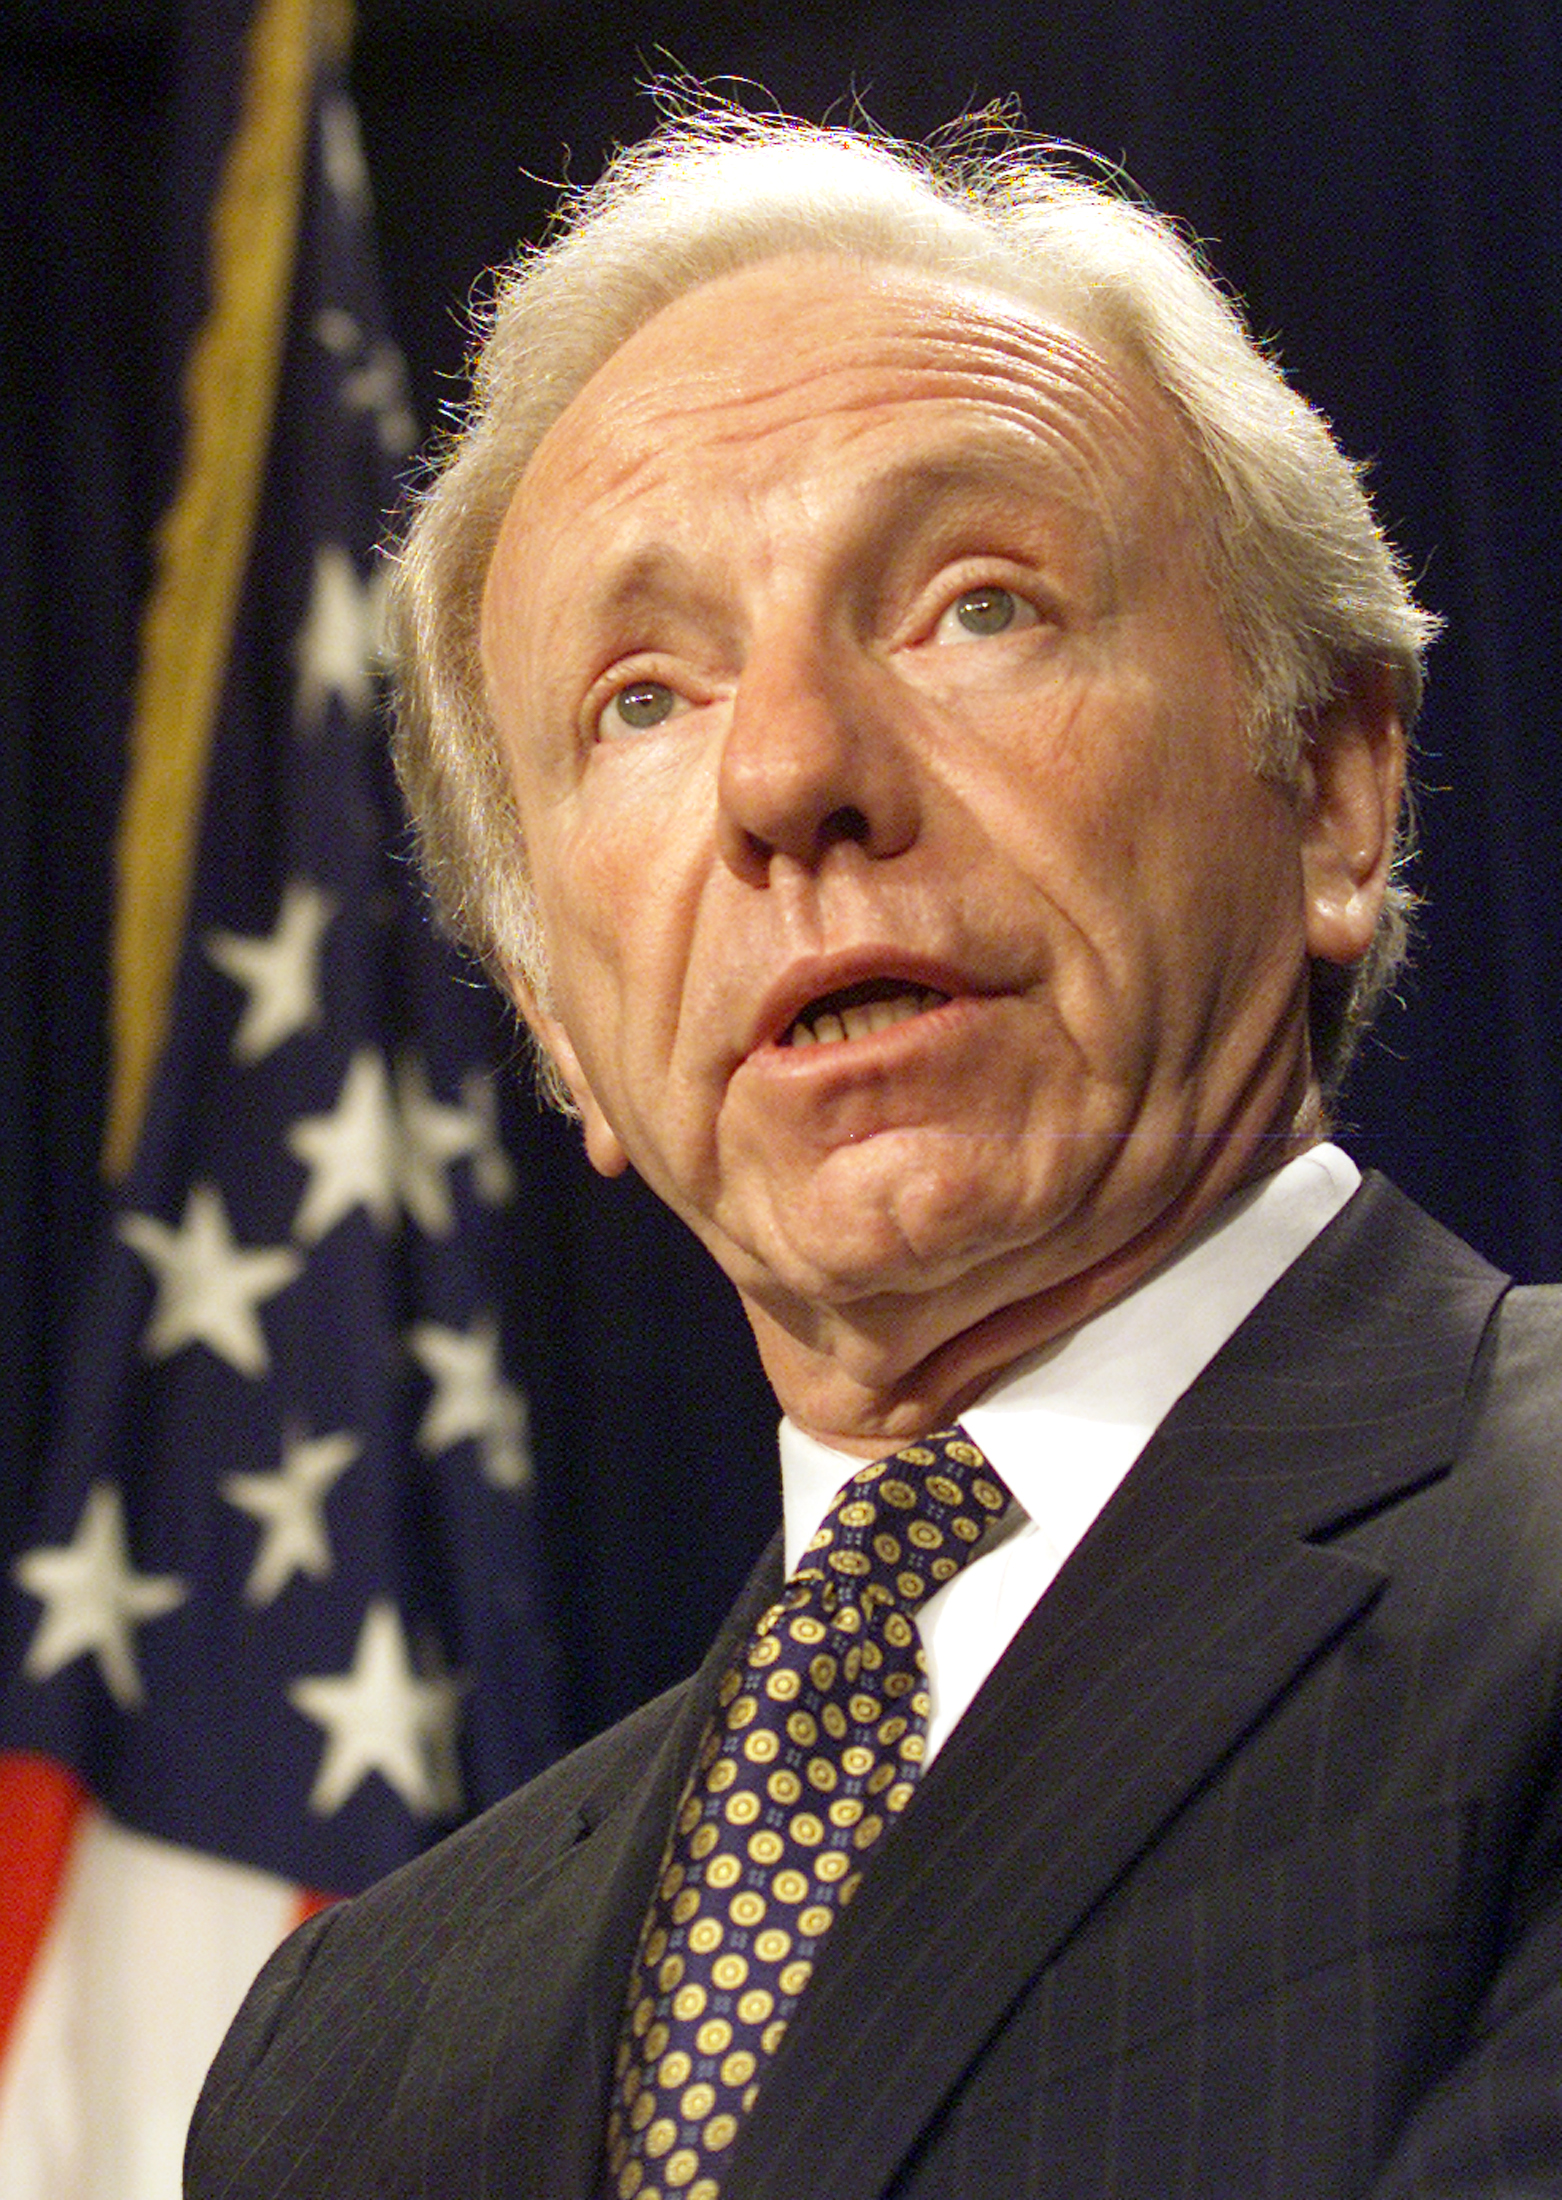 Connecticut Today with Paul Pacelli: A Chat With Former Senator Joe Lieberman